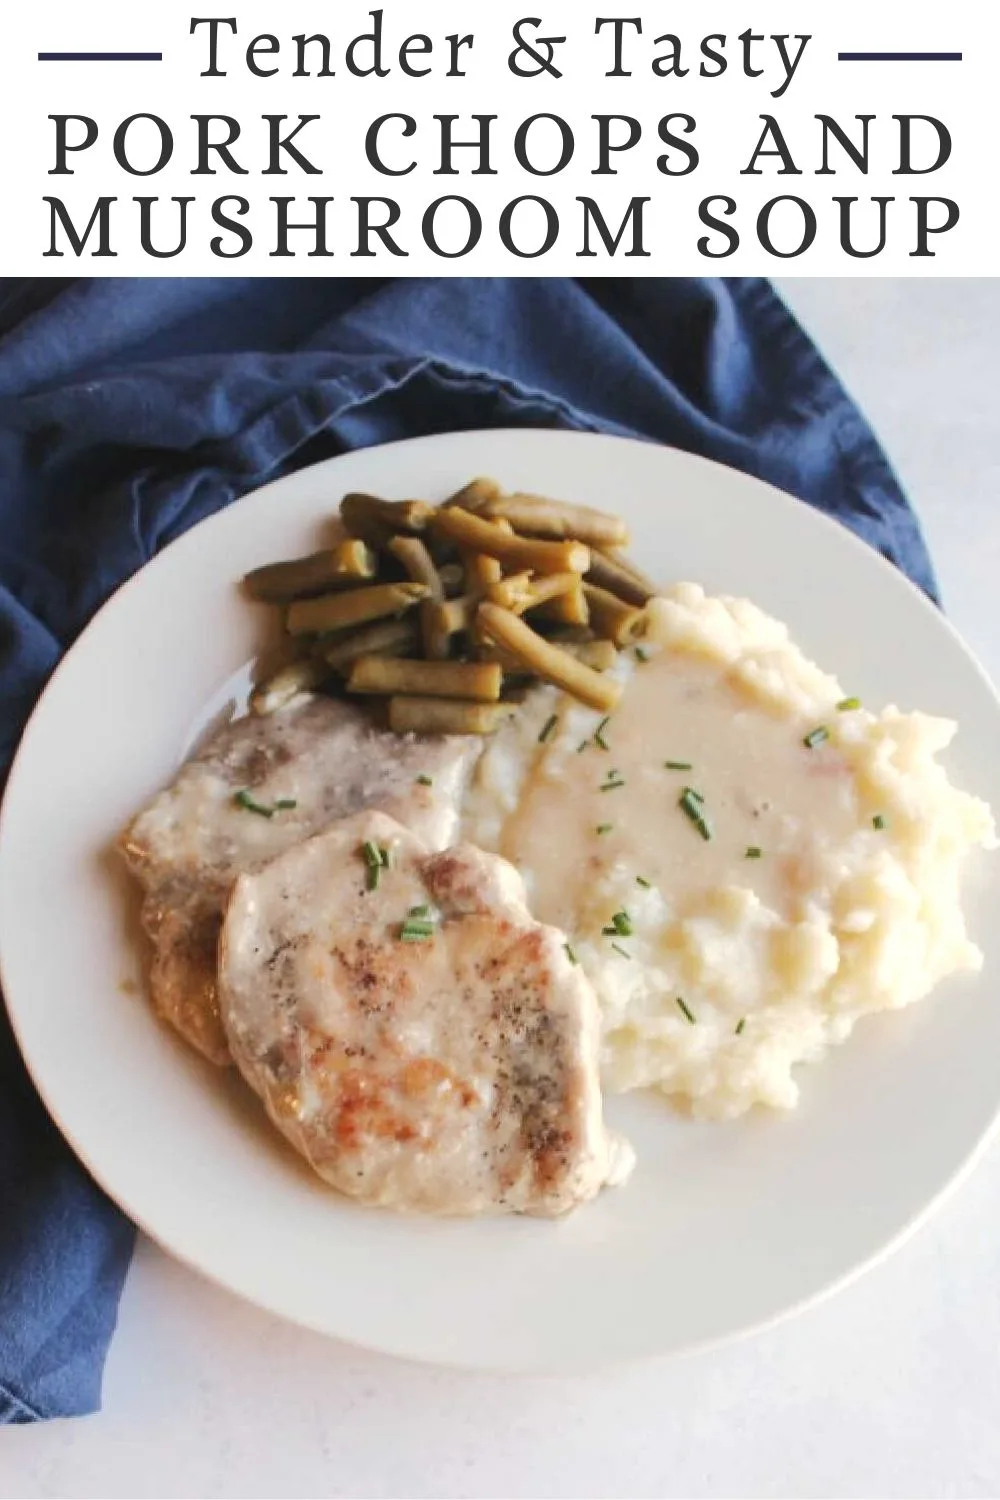 Super tender pork chops with a creamy mushroom gravy. This is comfort food at its finest and it is really quick and easy dinner to make.